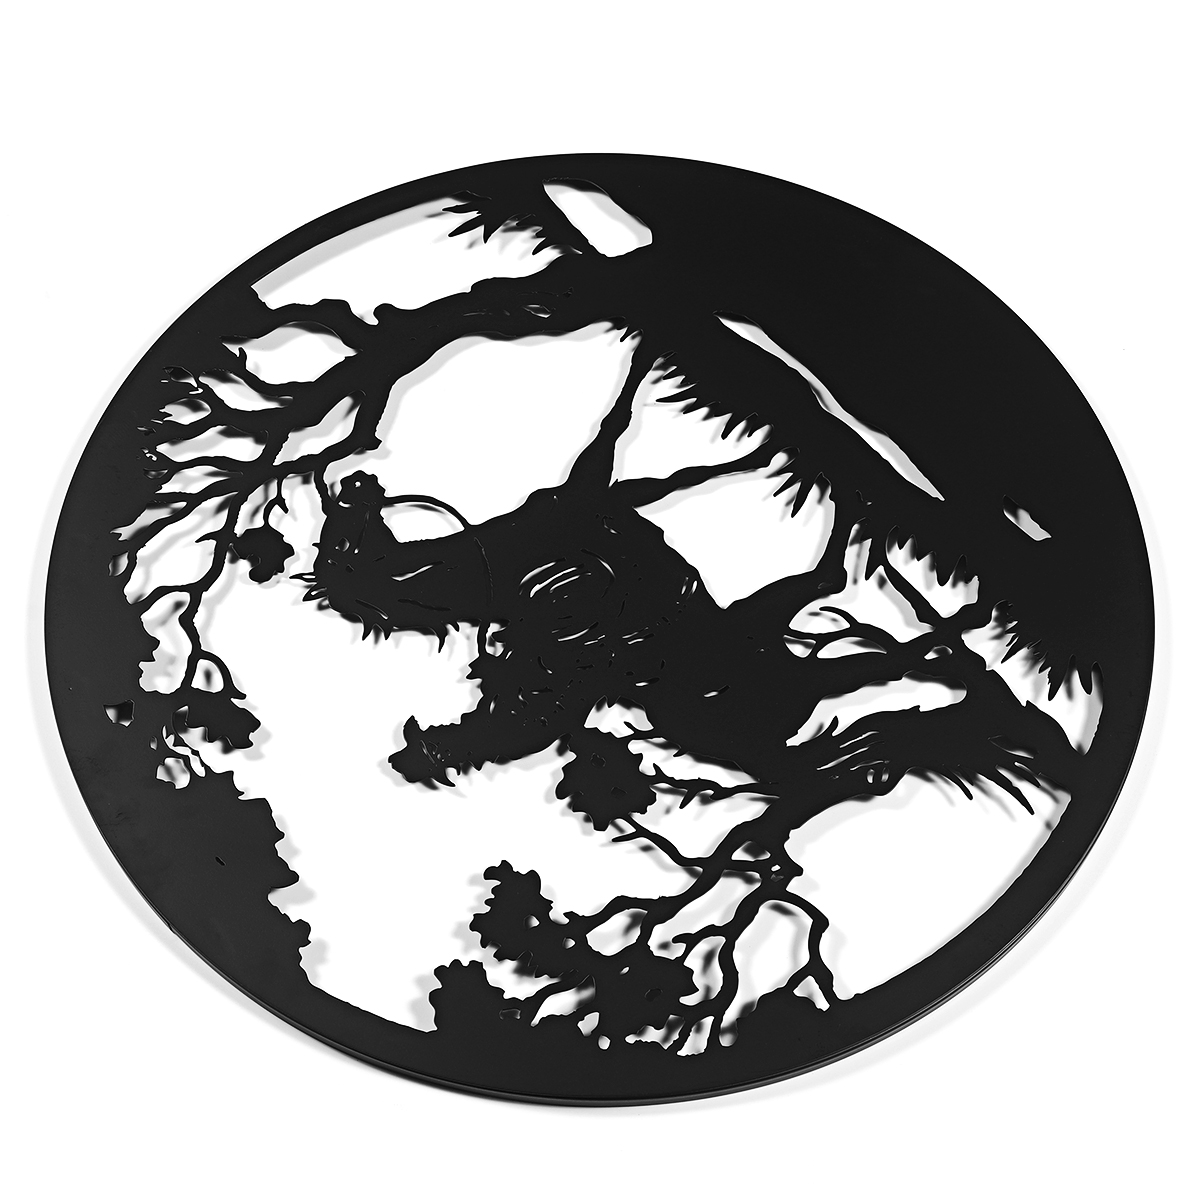 Man-Riding-Horse-In-Forest-Round-Black-Metal-Wall-Hanging-Art-Decoration-Room-1794308-7